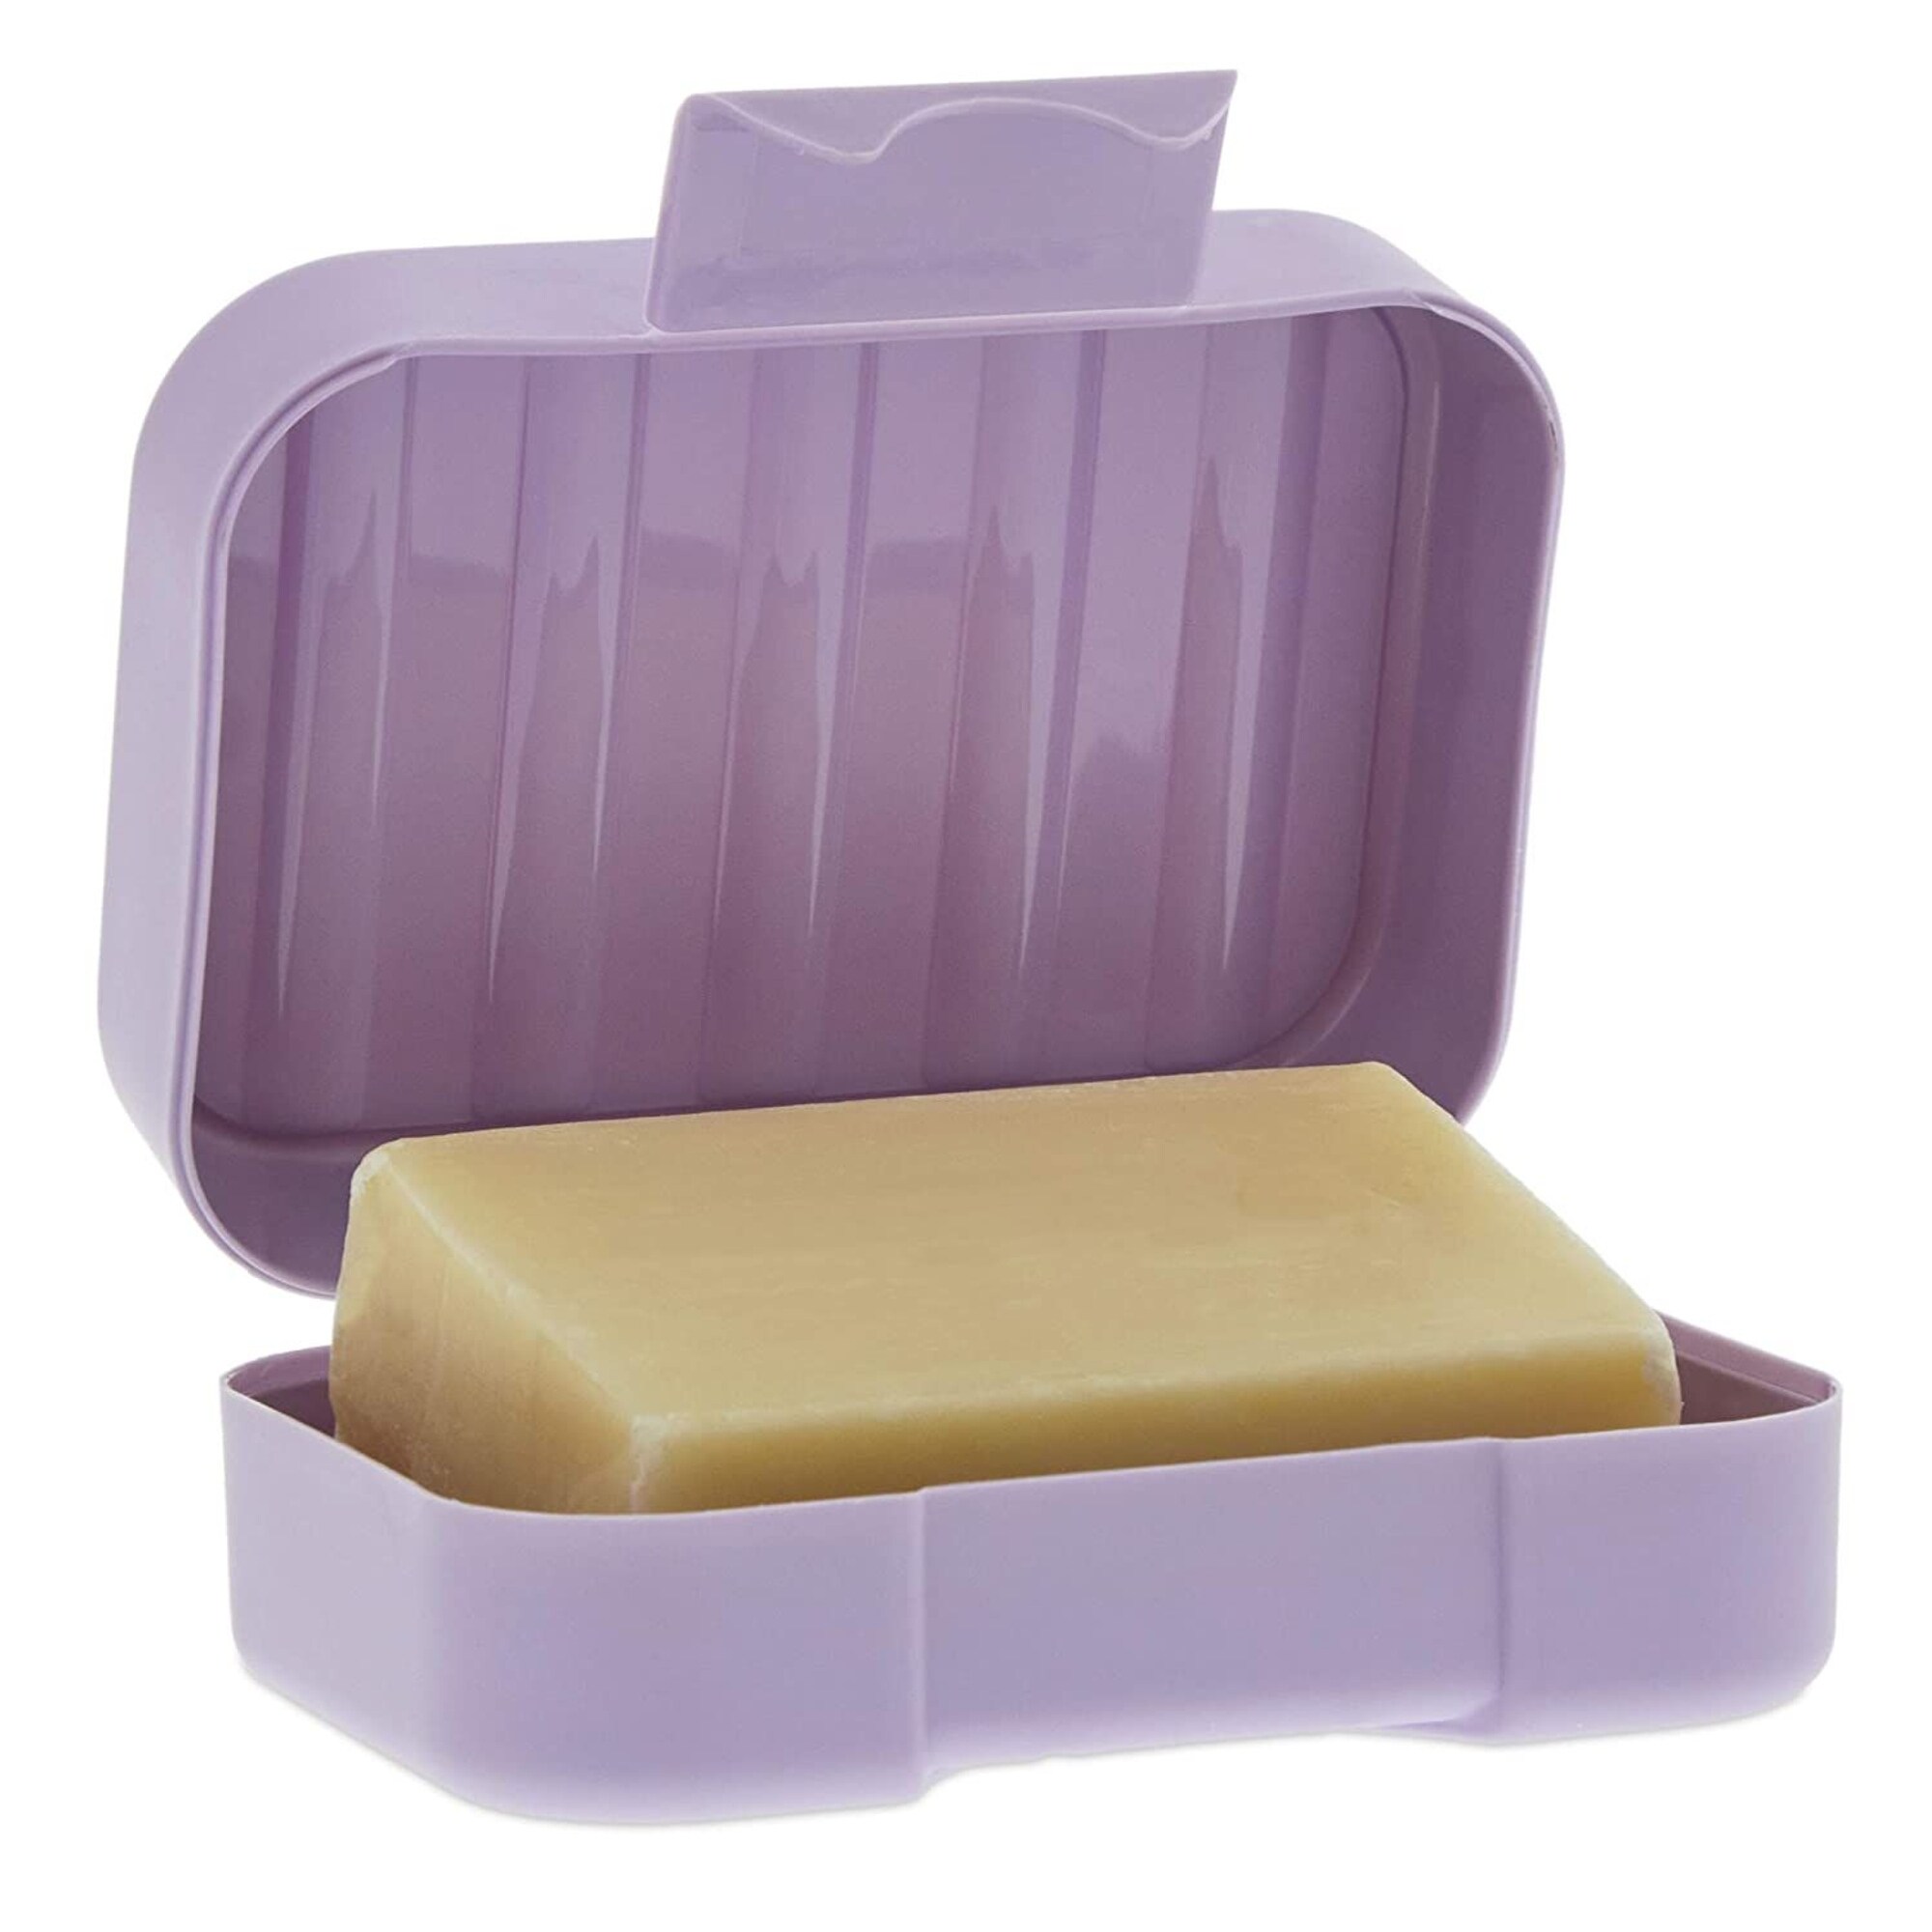 https://ak1.ostkcdn.com/images/products/is/images/direct/6c51094652b5a3fb0cd7295f71af41a383d2f3ae/Soap-Holder-Travel-Cases-in-4-Colors-%284.5-x-1.8-x-3.3-in%2C-4-Pack%29.jpg